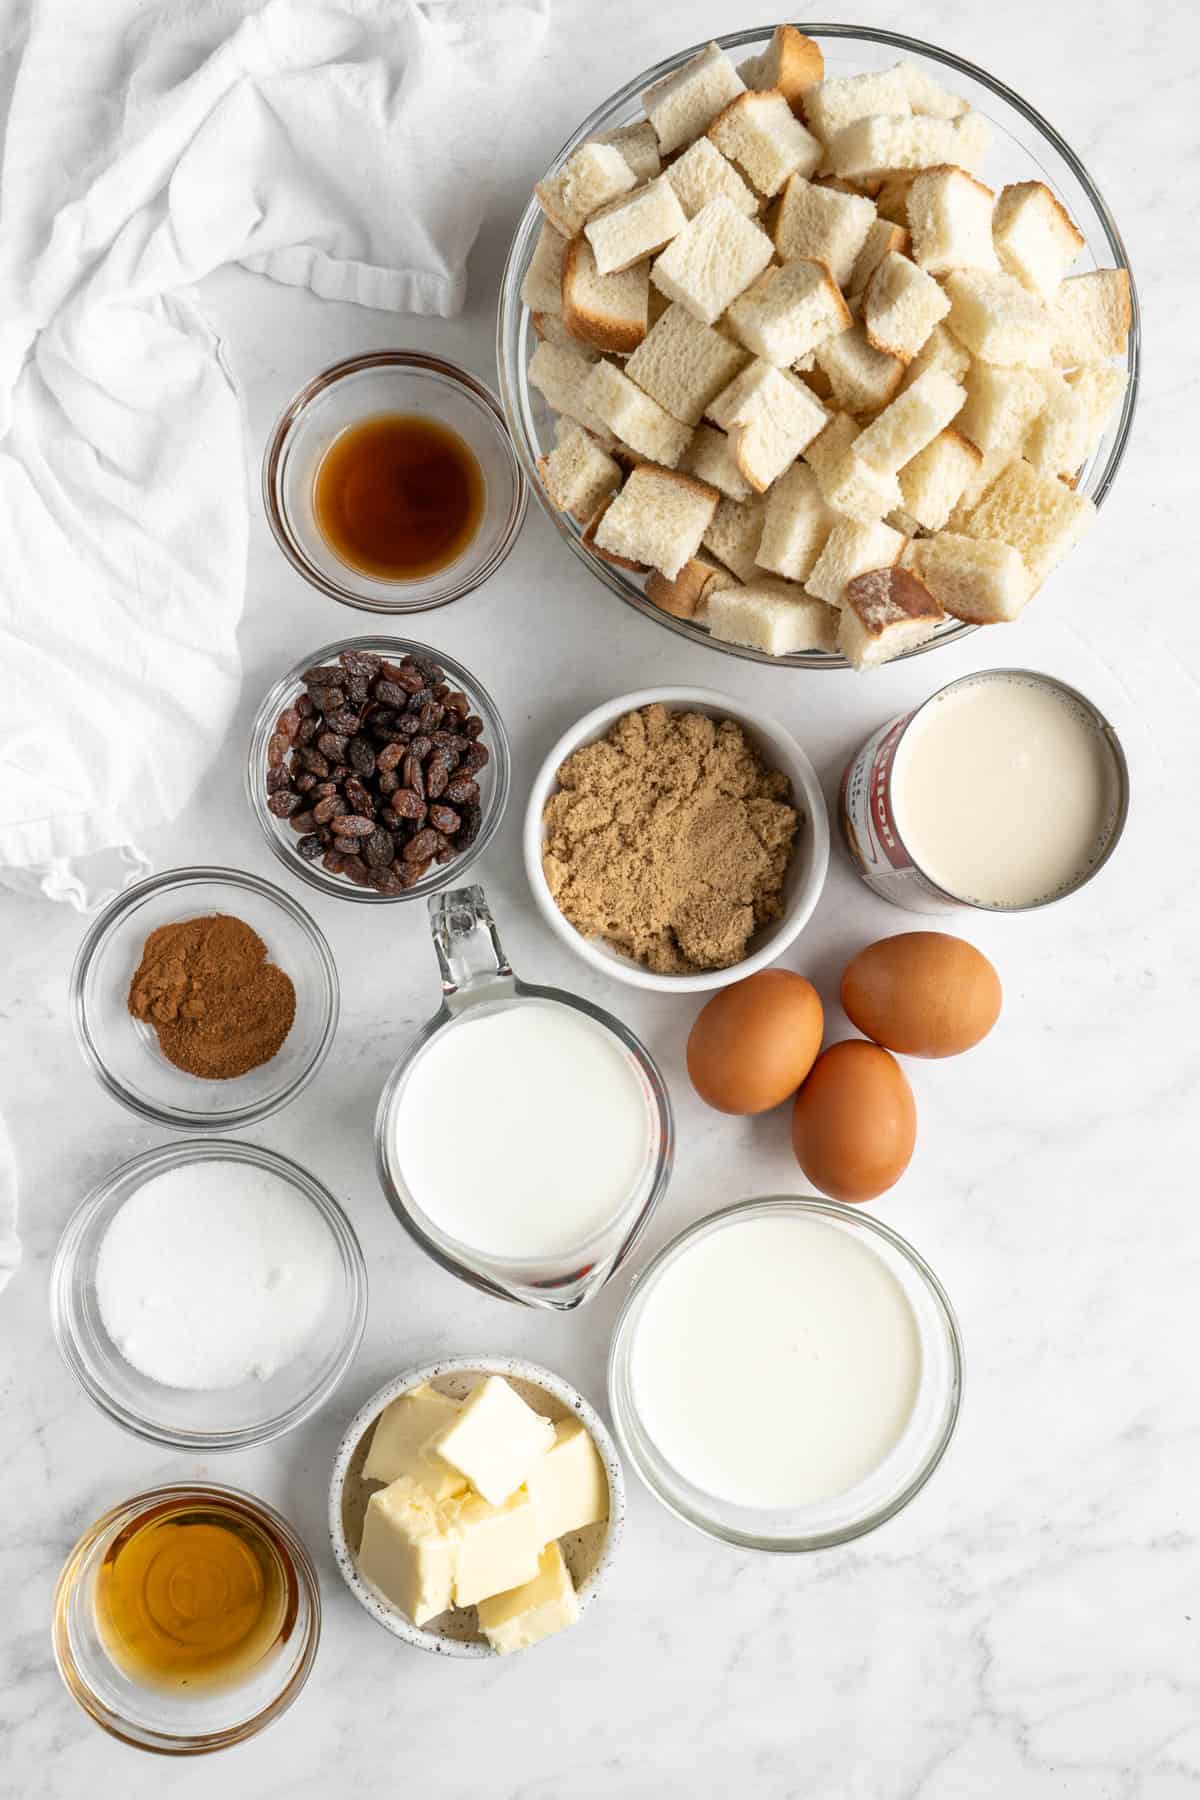 Ingredients to make classic bread pudding in small bowls on a white surface.